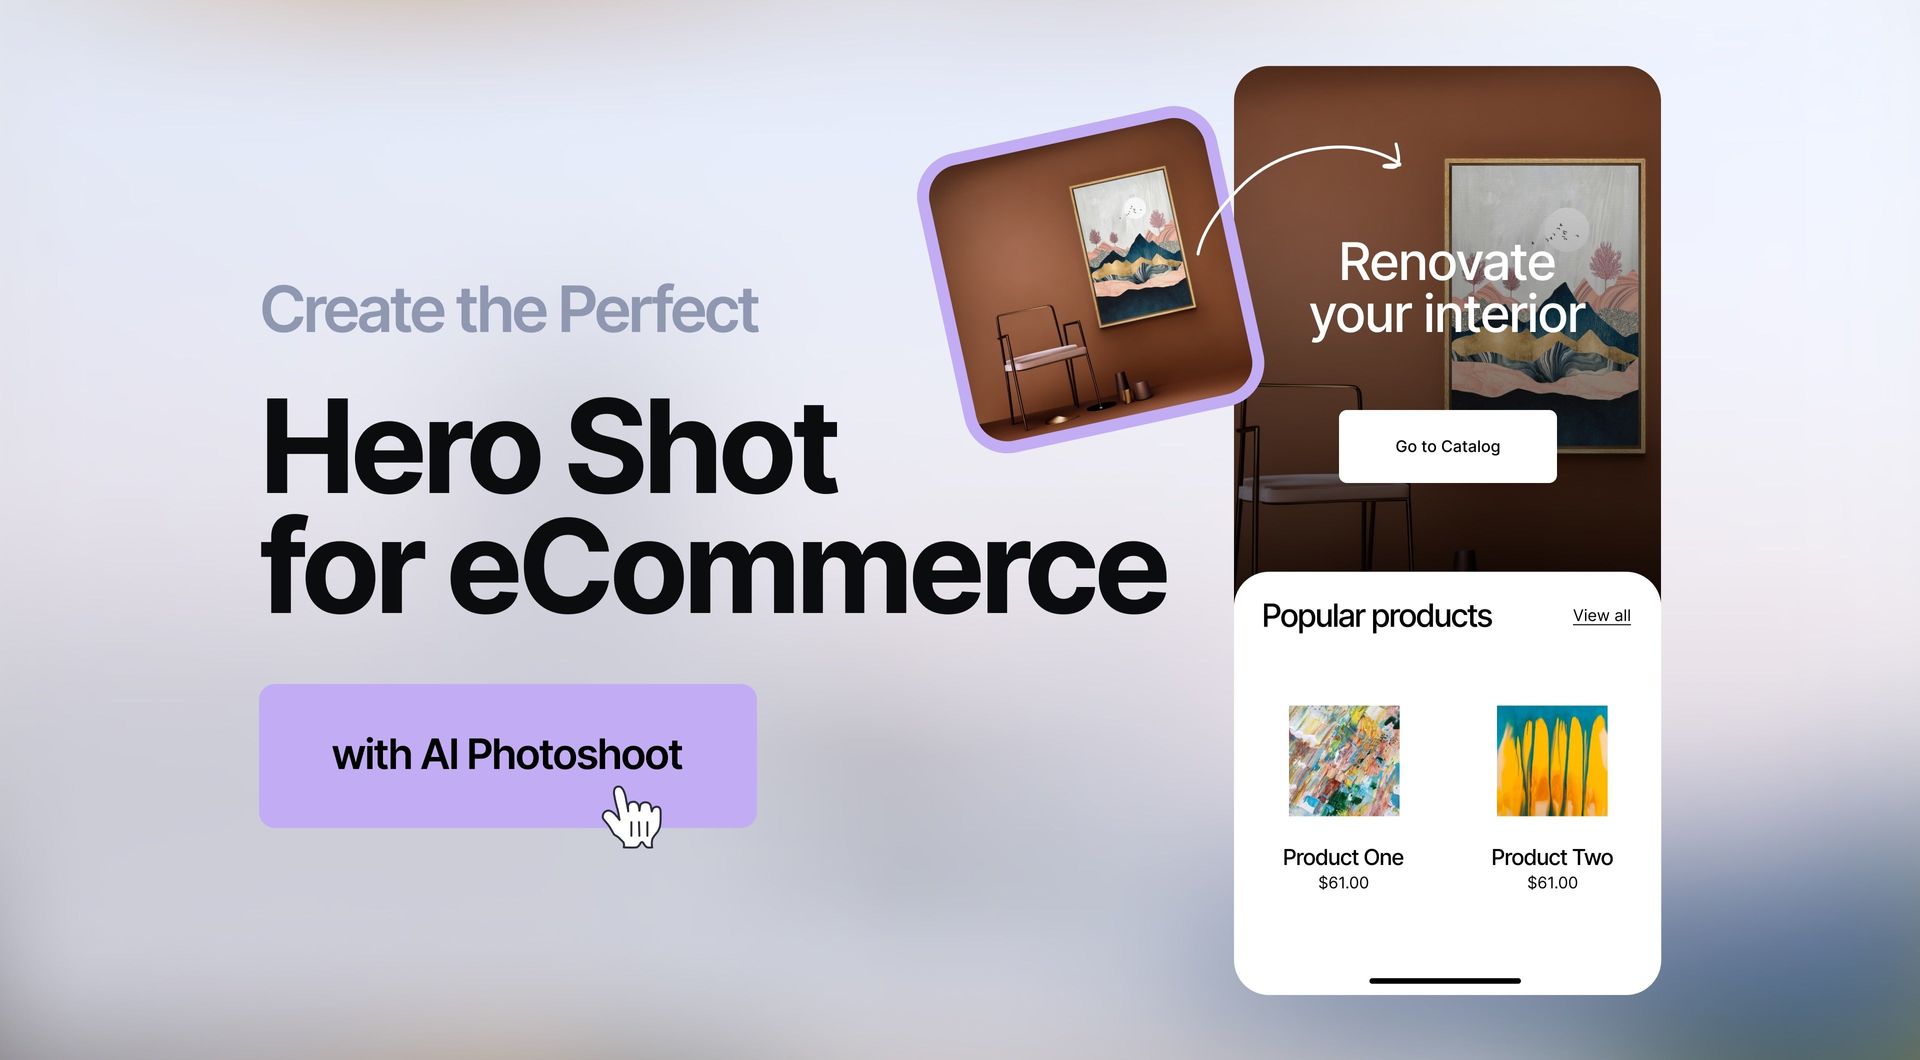 Picture for Create the Perfect Hero Image for eCommerce | Claid.ai Guide article